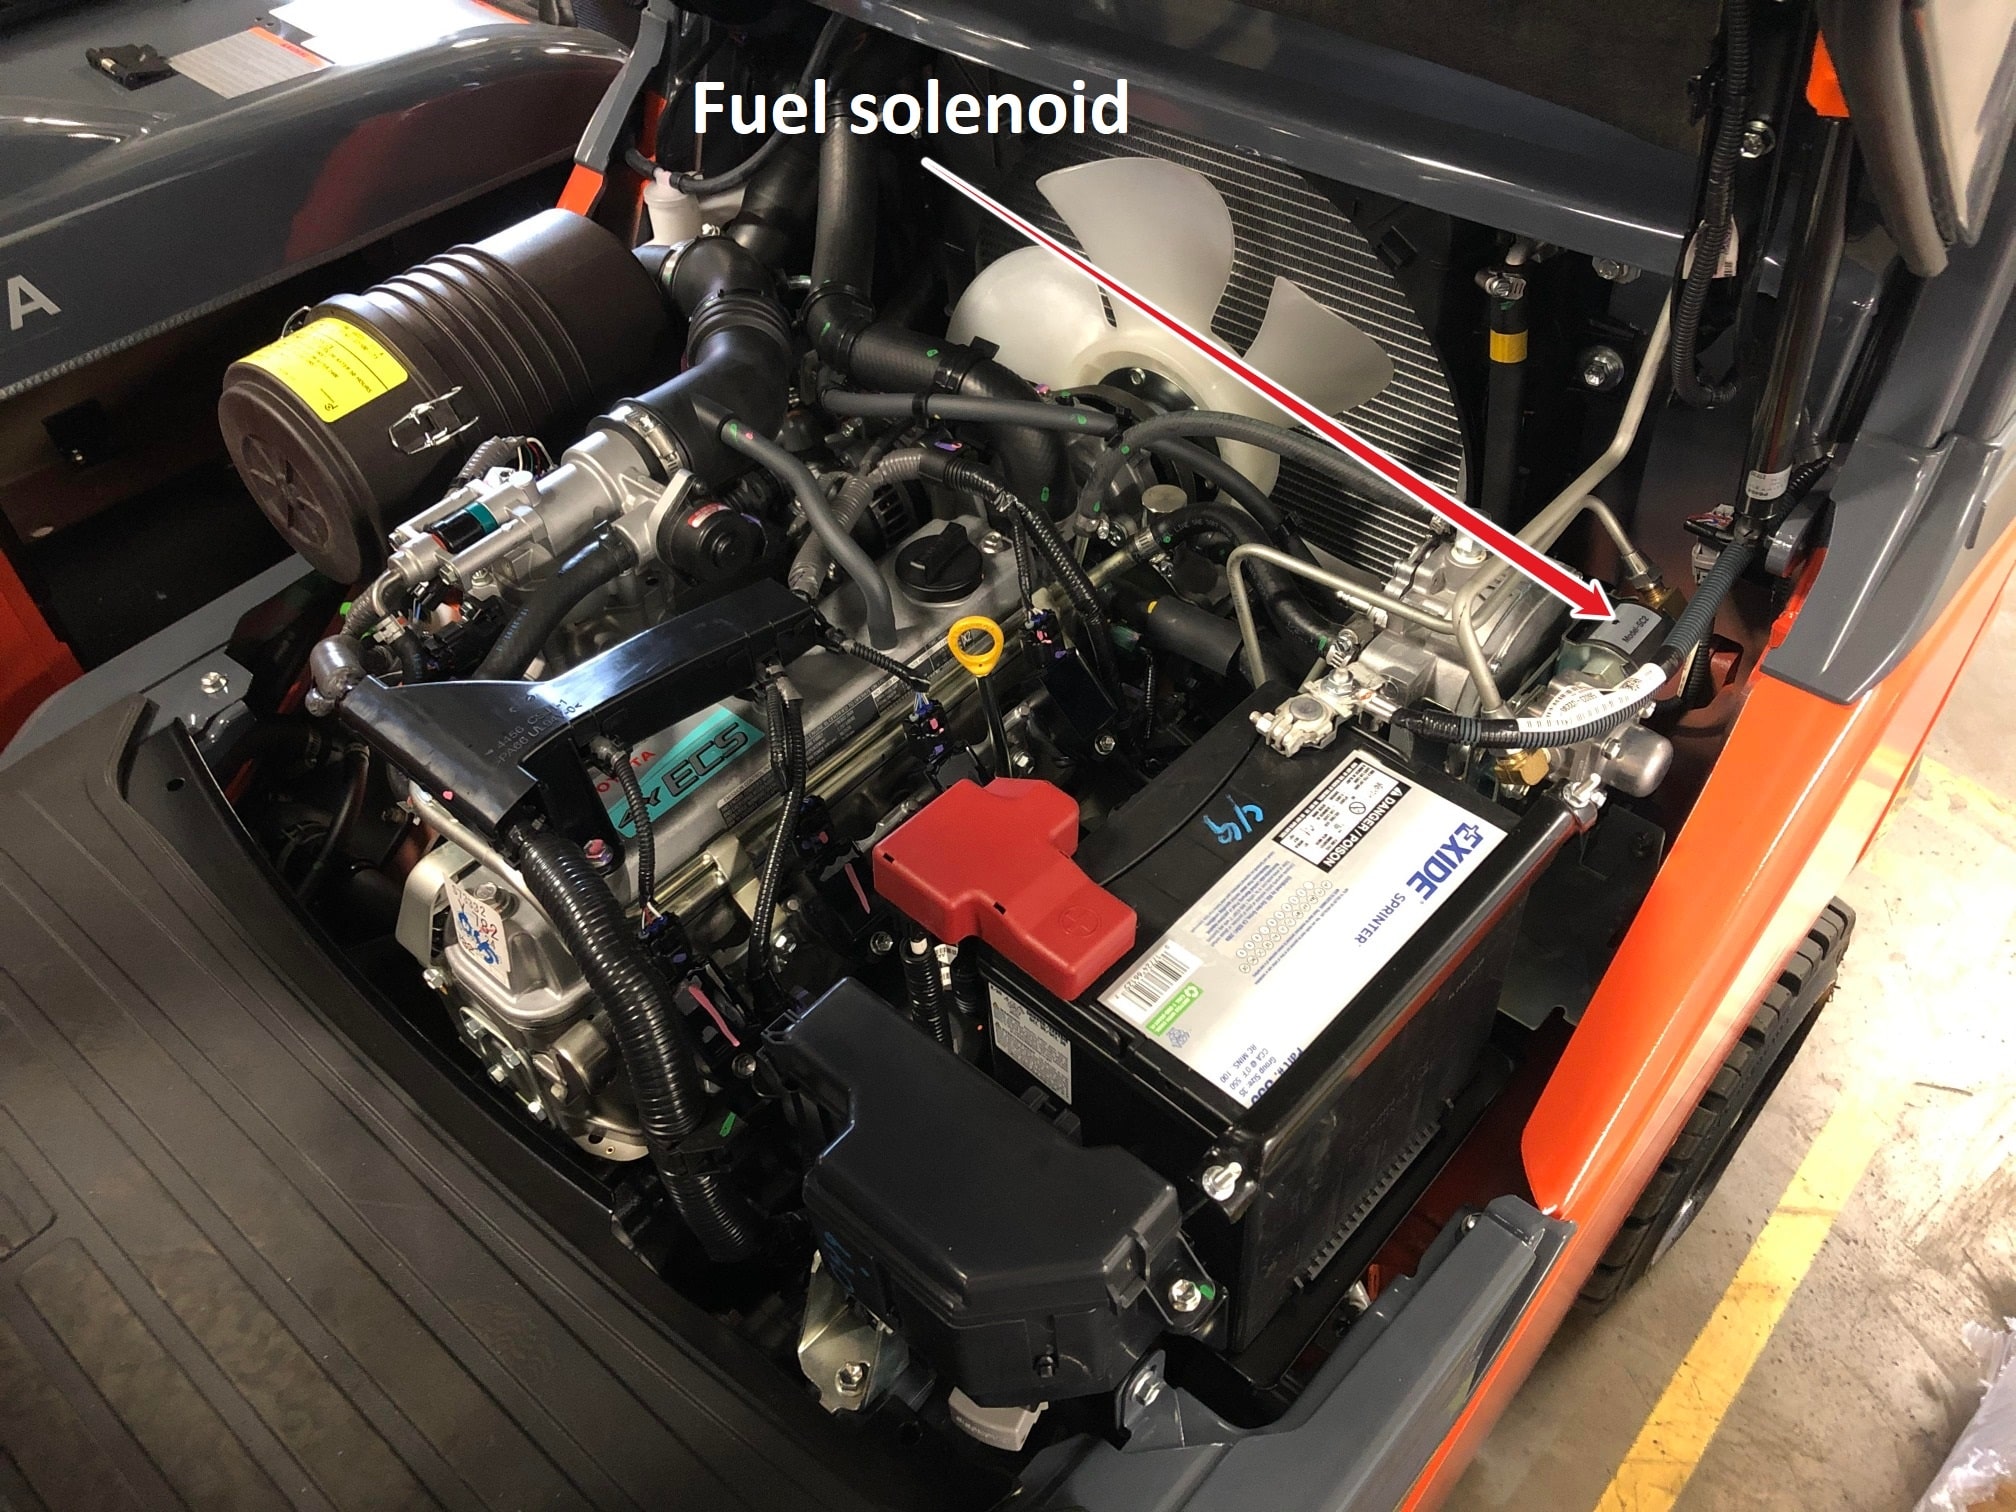 The location of the fuel solenoid in a Toyota forklift engine